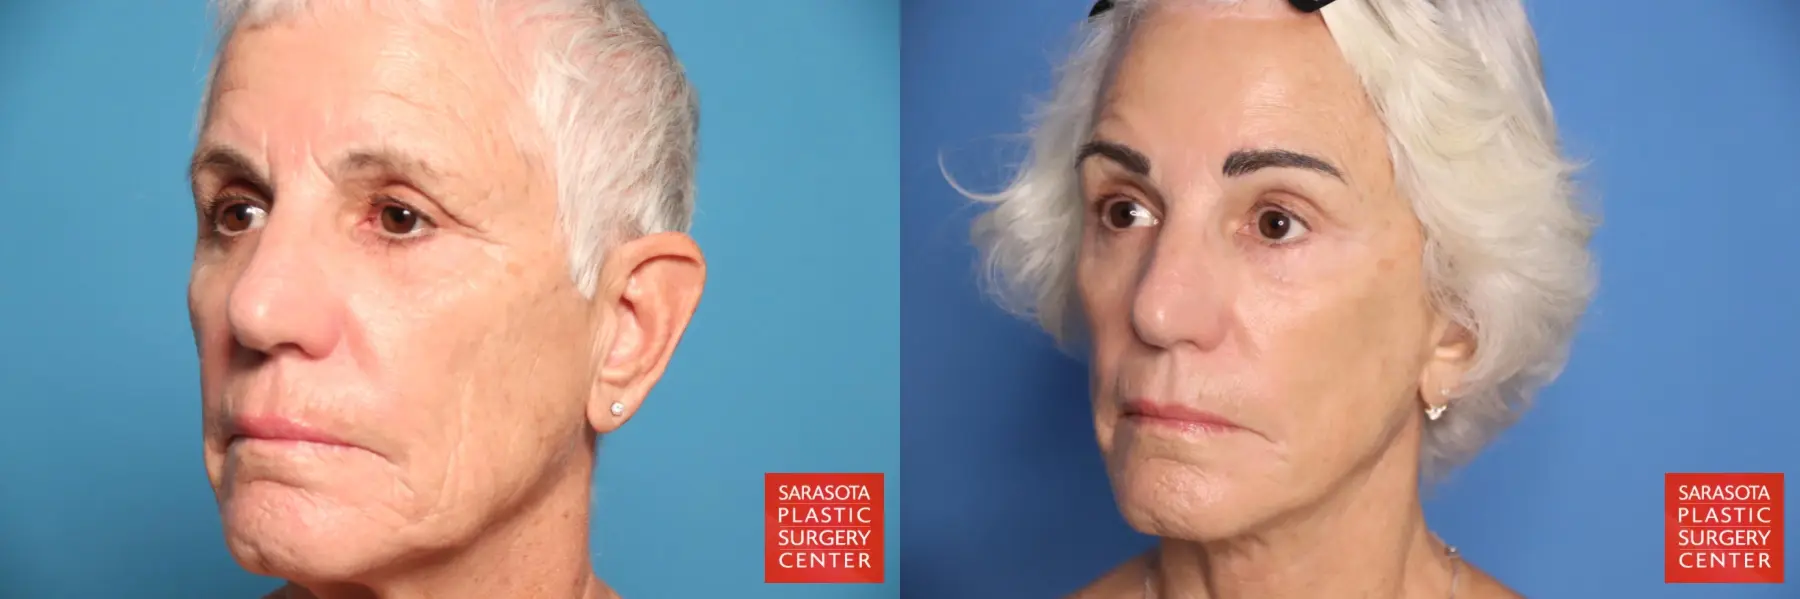 Brow Lift: Patient 4 - Before and After 2